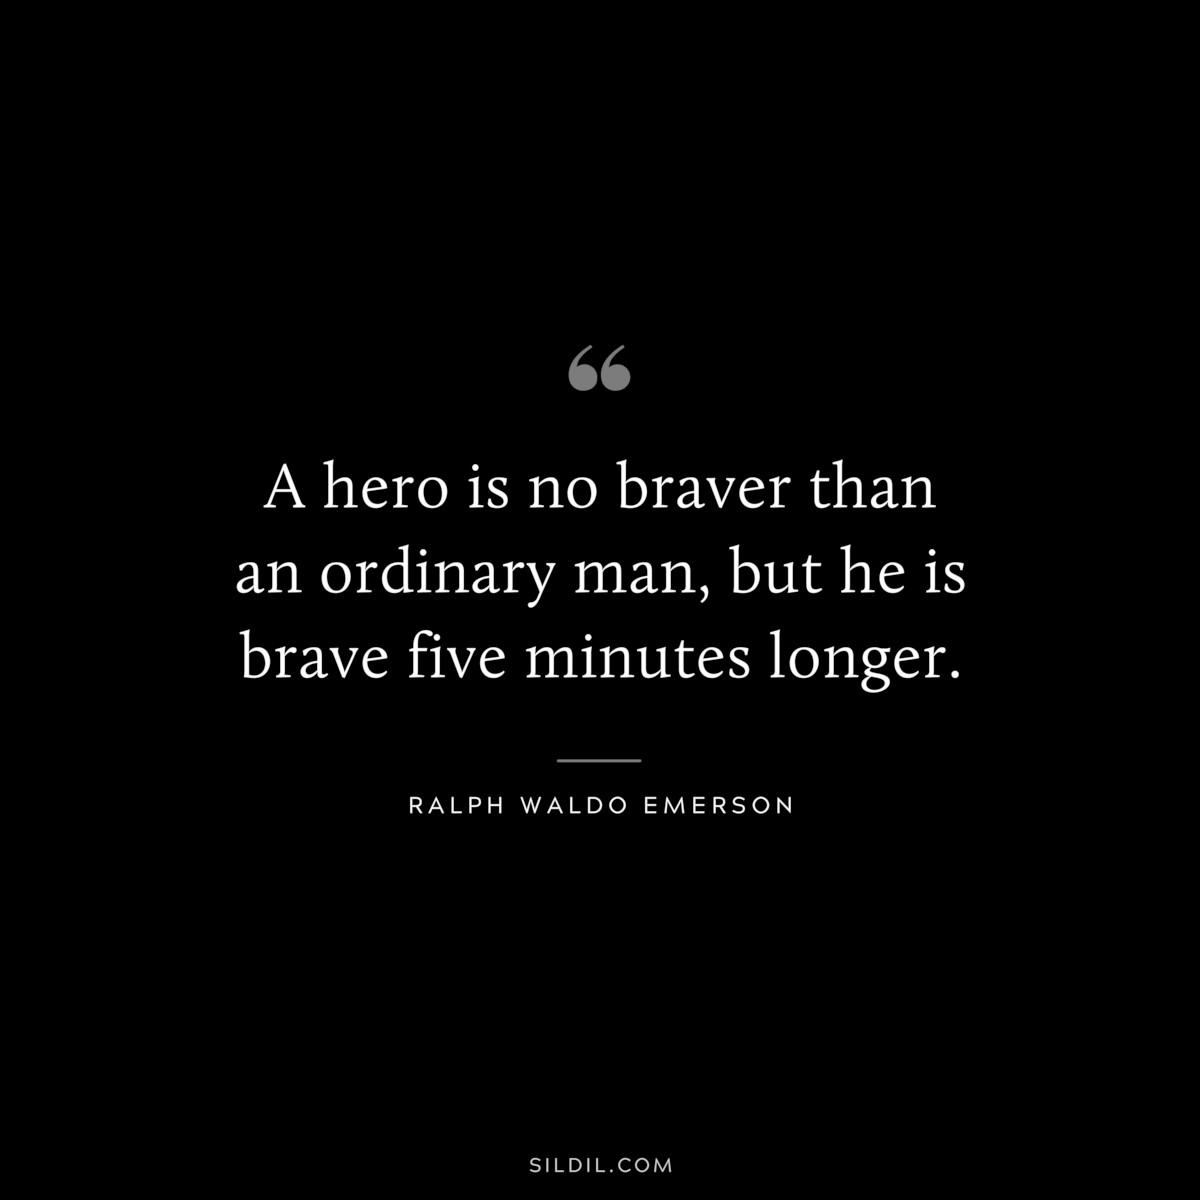 A hero is no braver than an ordinary man, but he is brave five minutes longer. — Ralph Waldo Emerson